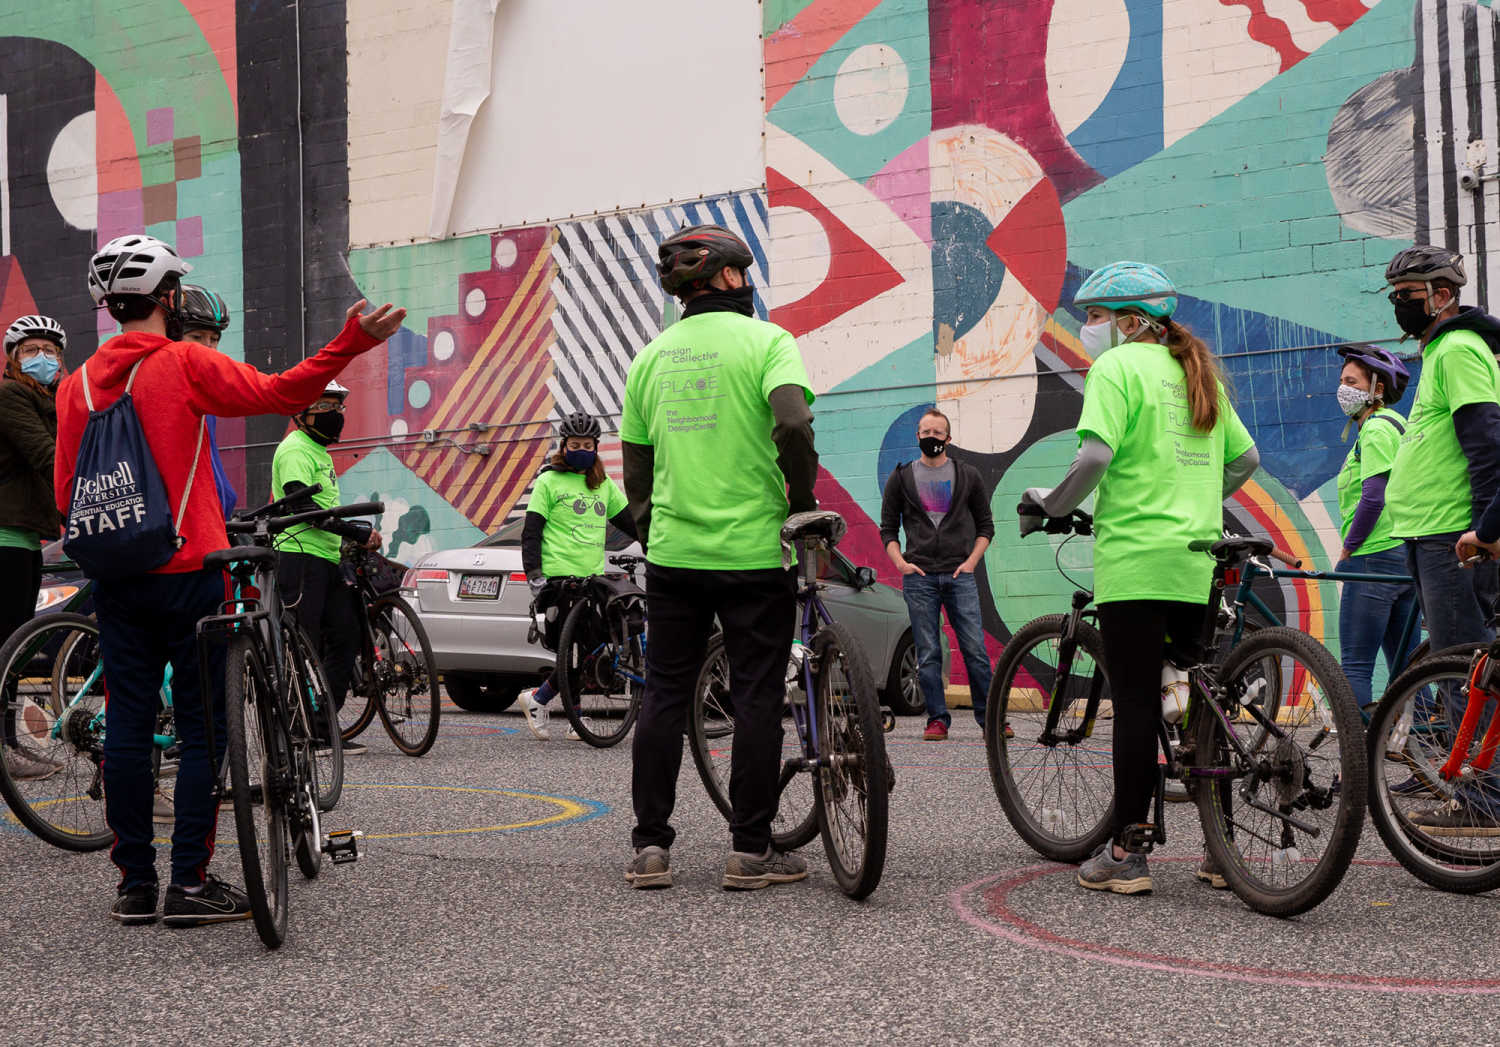 "Bike the Sites" was a sponsored event that toured a 9-mile loop of implemented Design for Distancing builds.